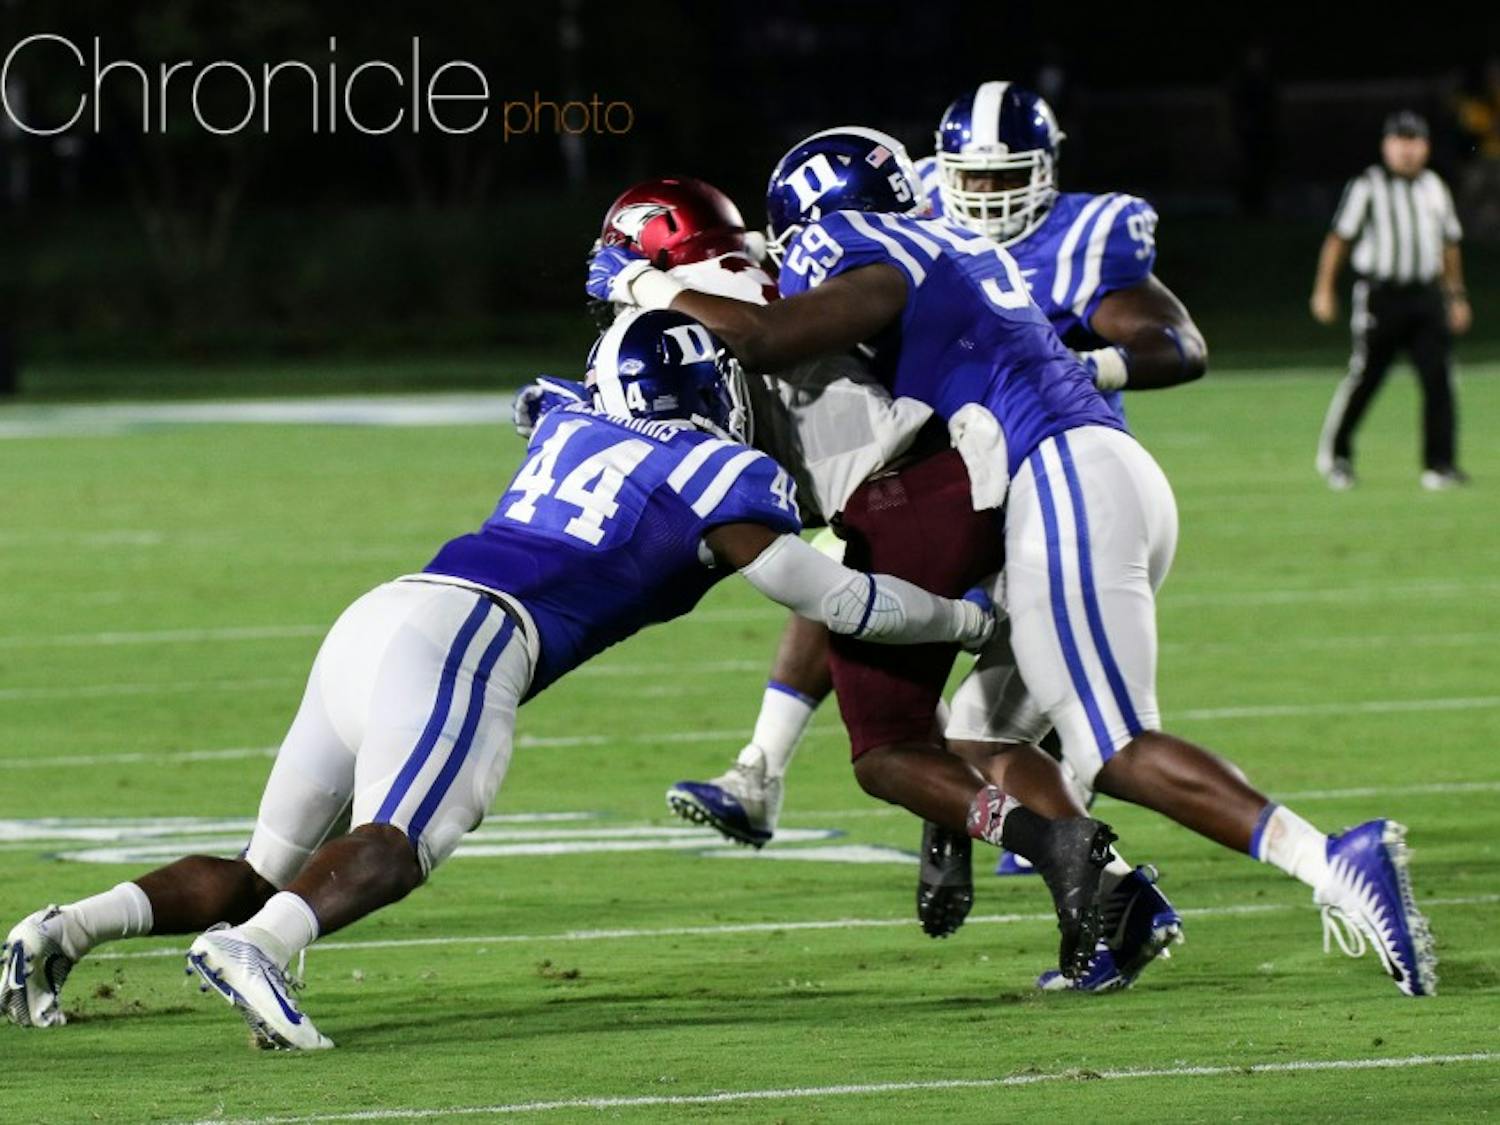 Here are our best shots from the Blue Devils' season opener